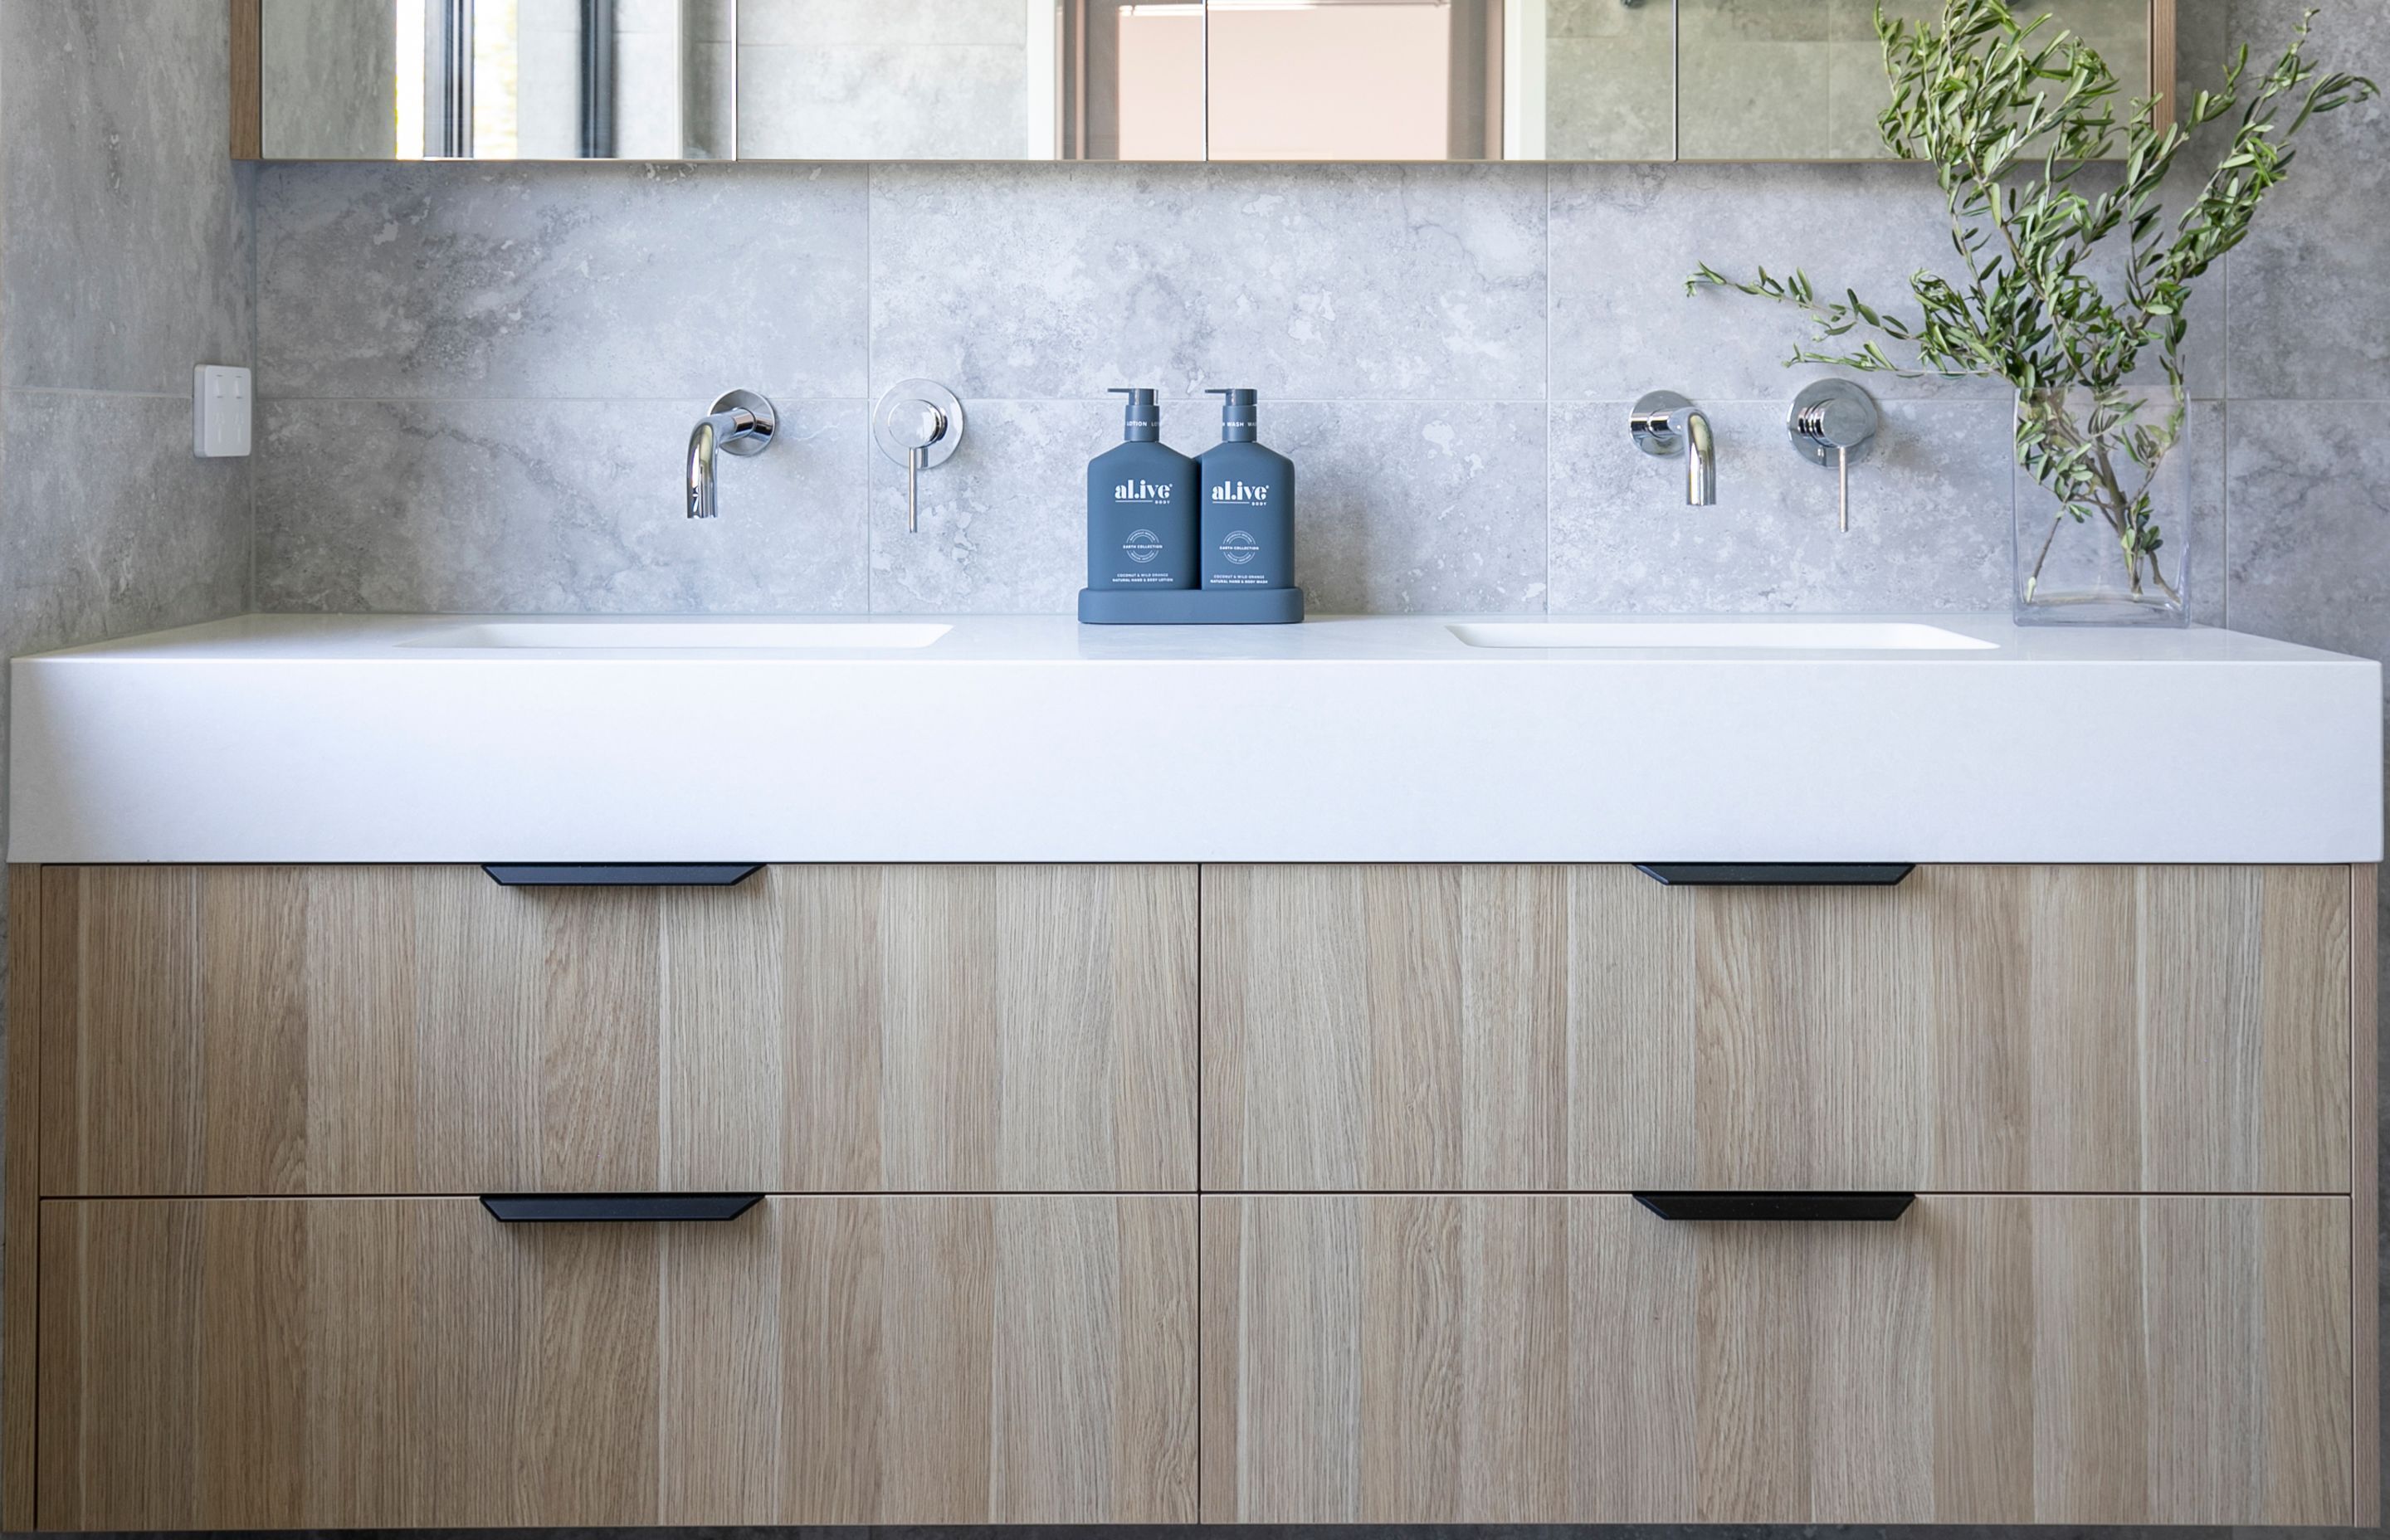 Photography: Rachael Lane | Featured on the above double vanity is our Polished Chrome Round Curved Wall Spout (SKU: MS05-C) and Round Wall Mixer (MW03-C).